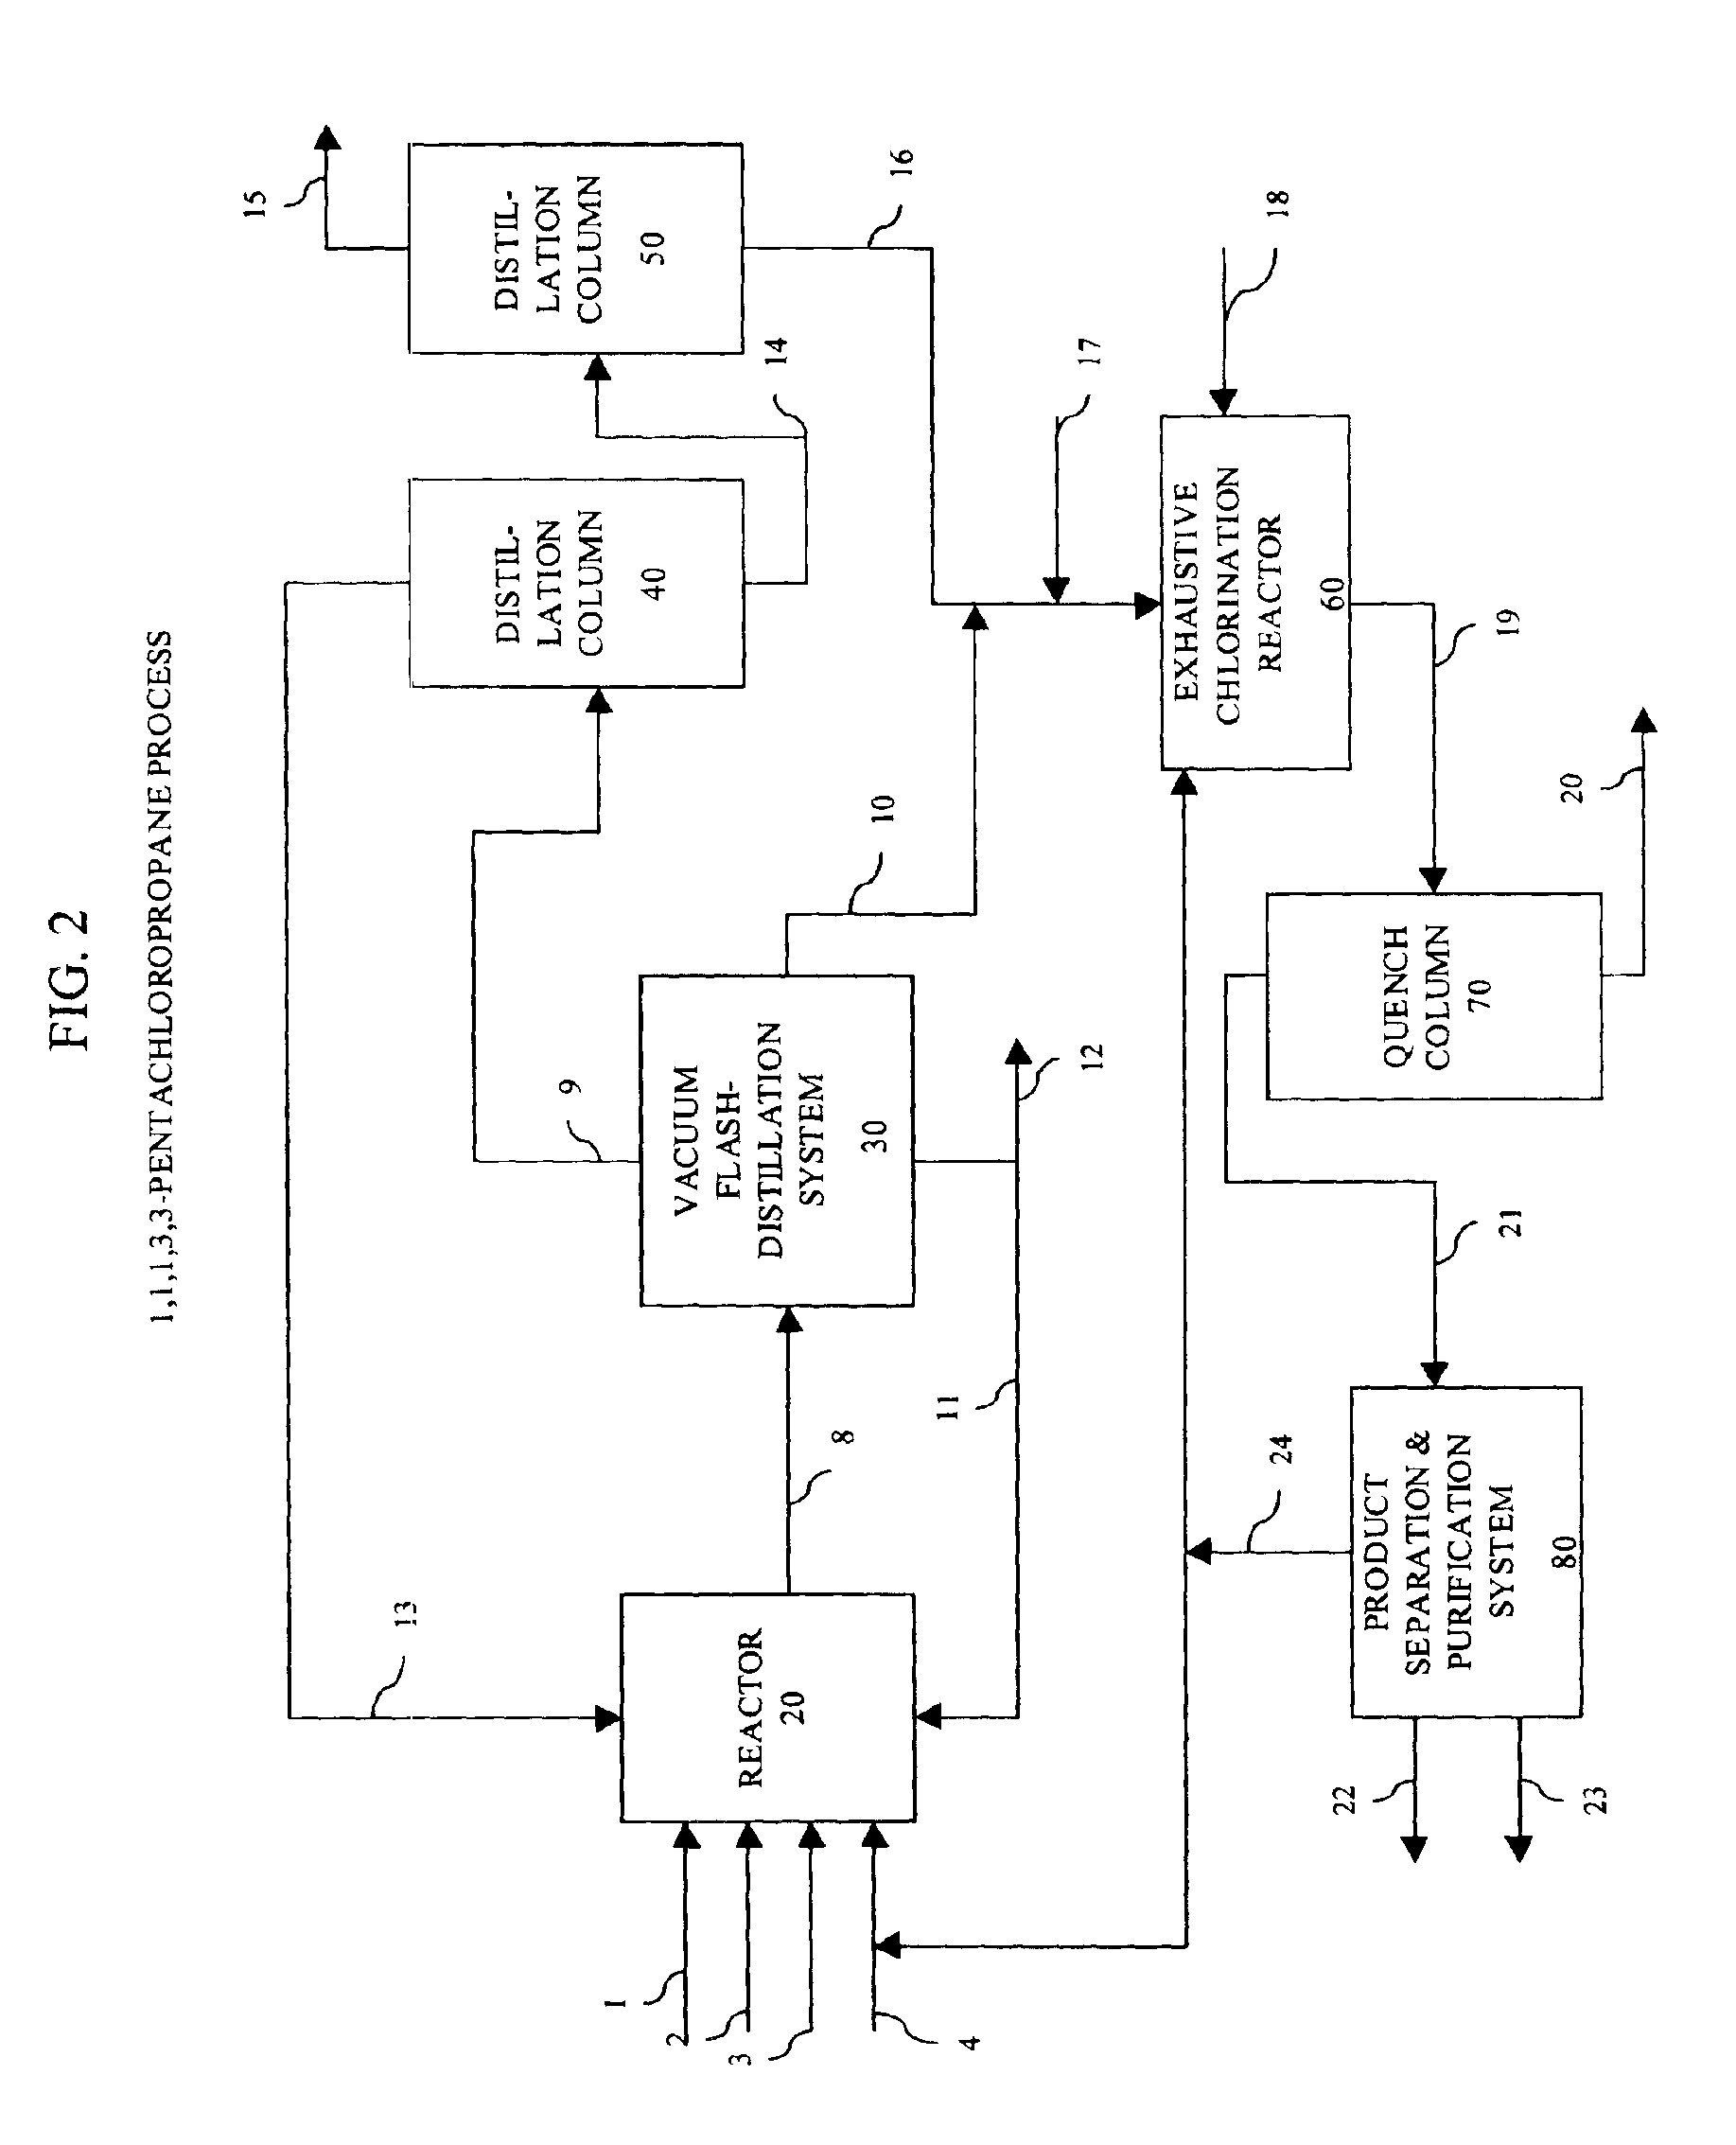 Method for reusing heavy end by-products in the manufacture of polychlorinated alkanes